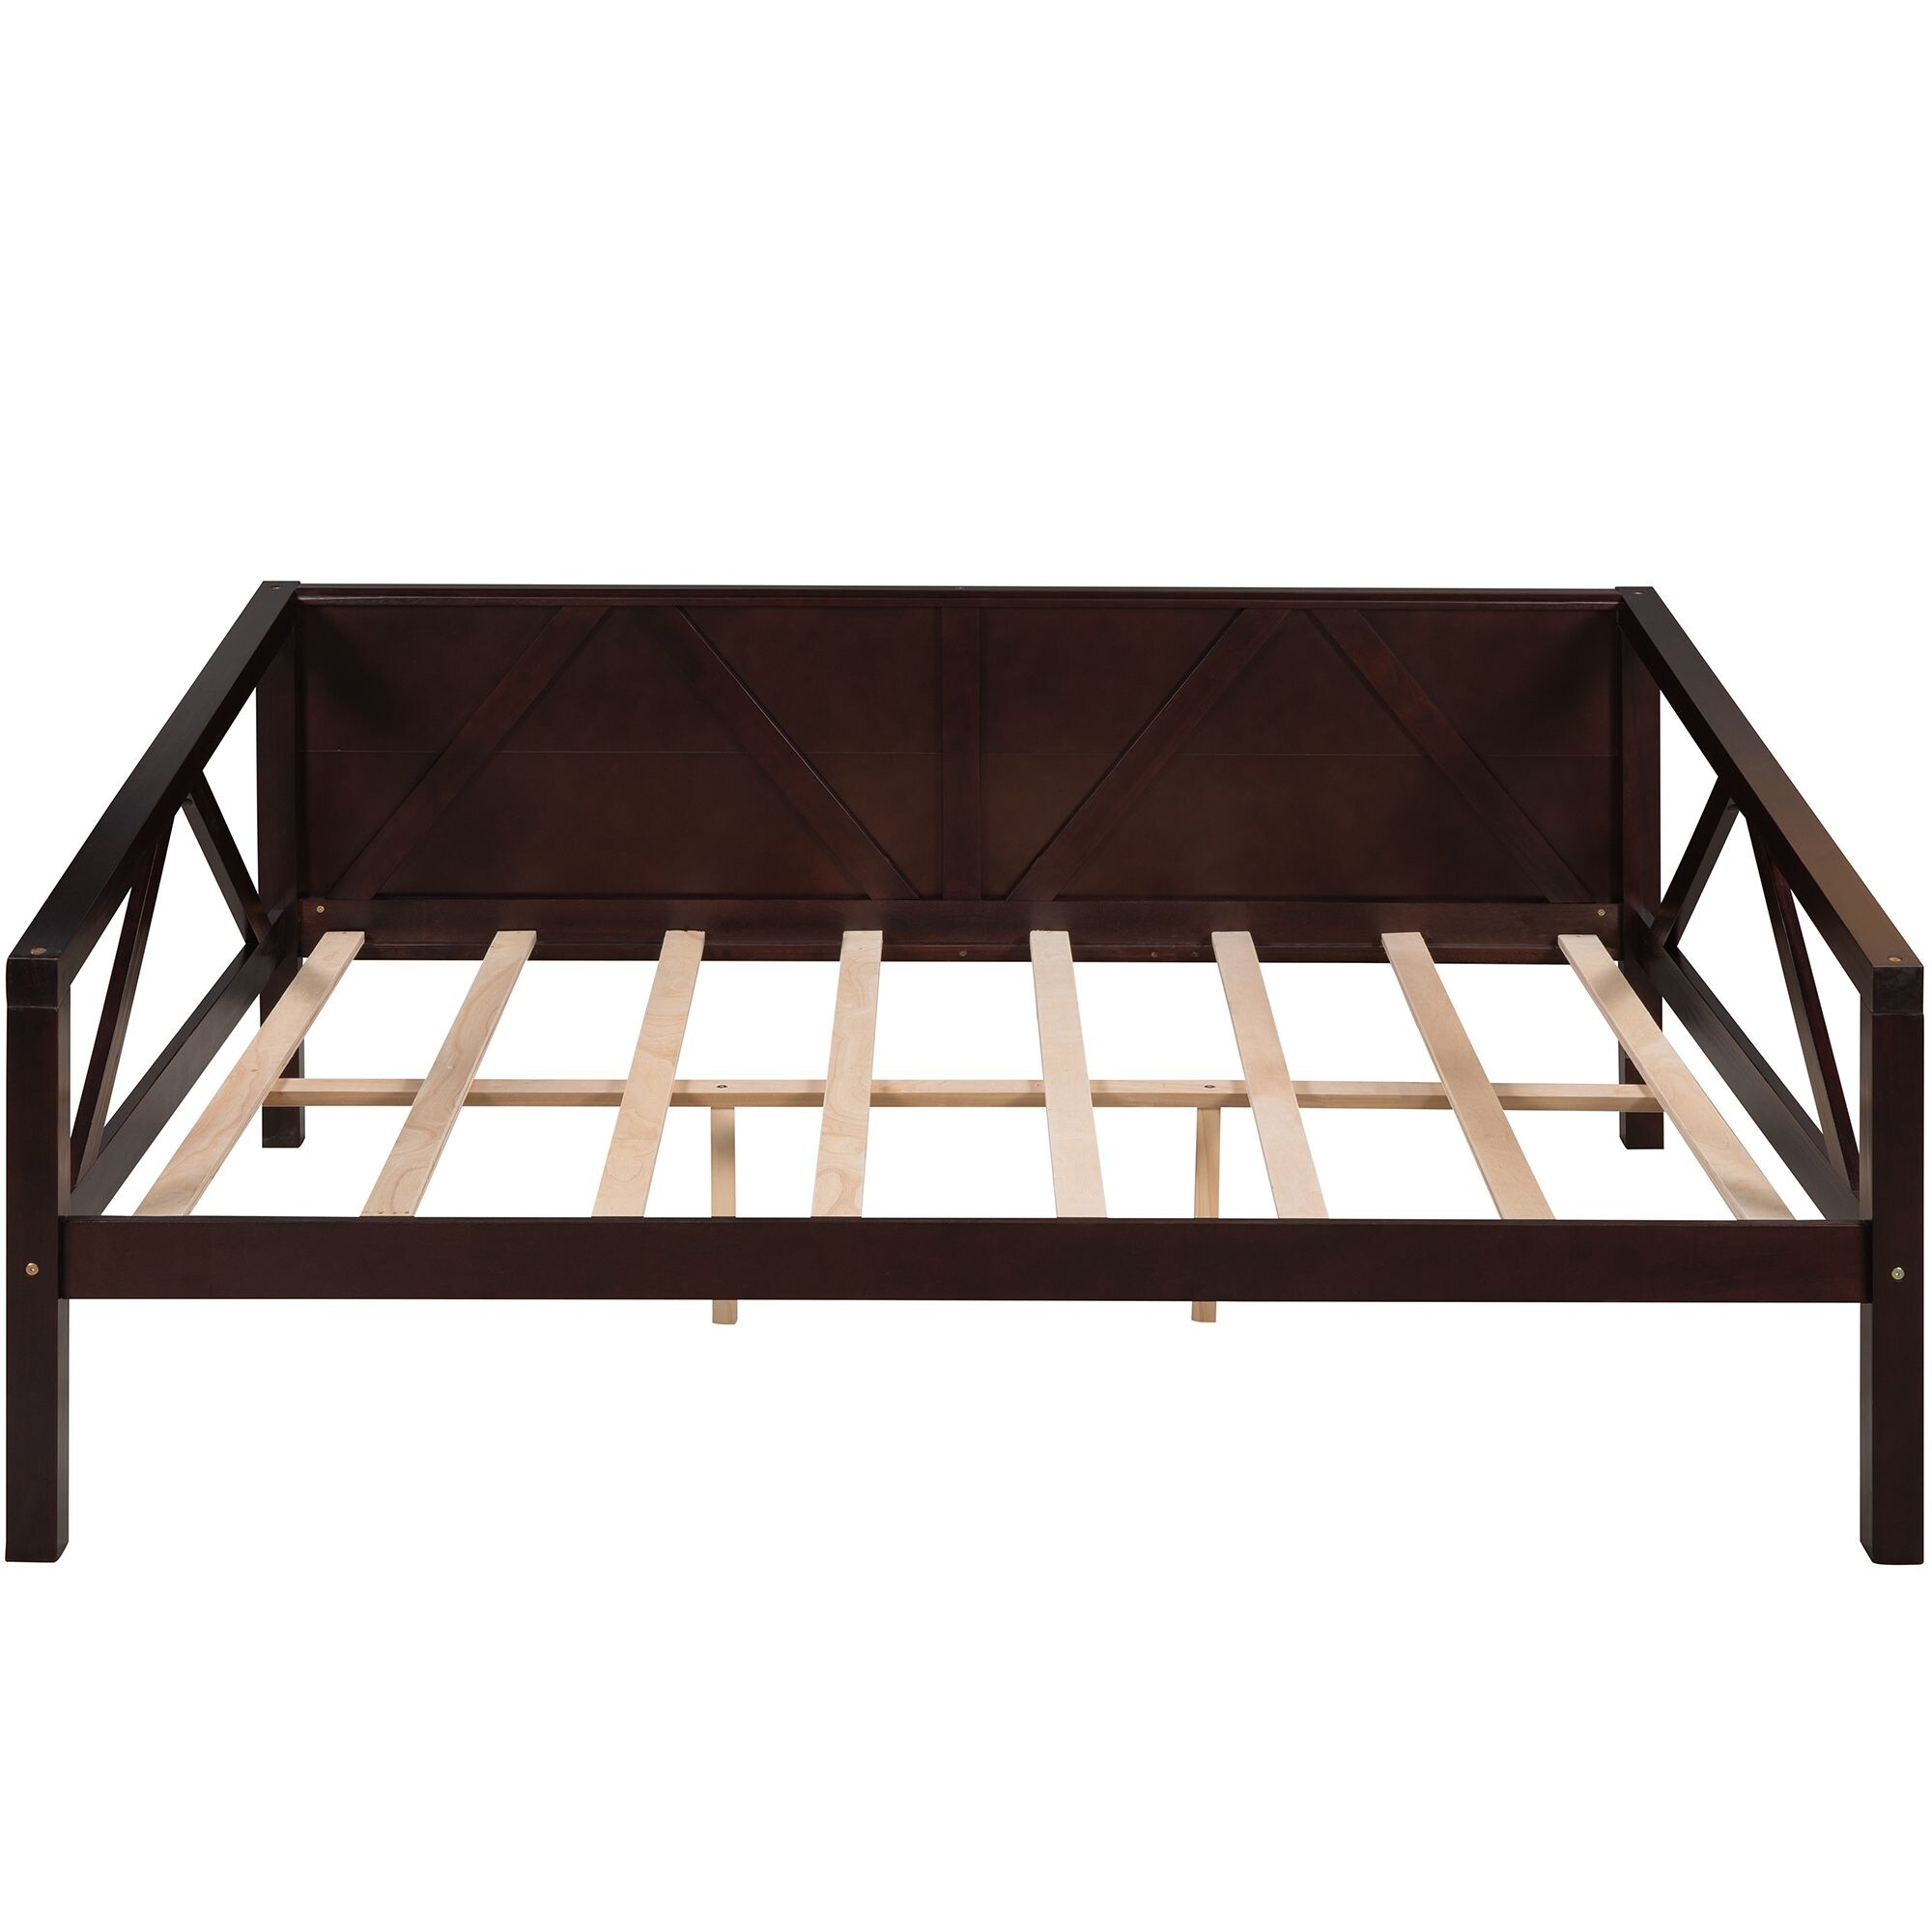 Yiekholo Contemporary Full Size Daybed in Espresso Wood - Sturdy Pine ...